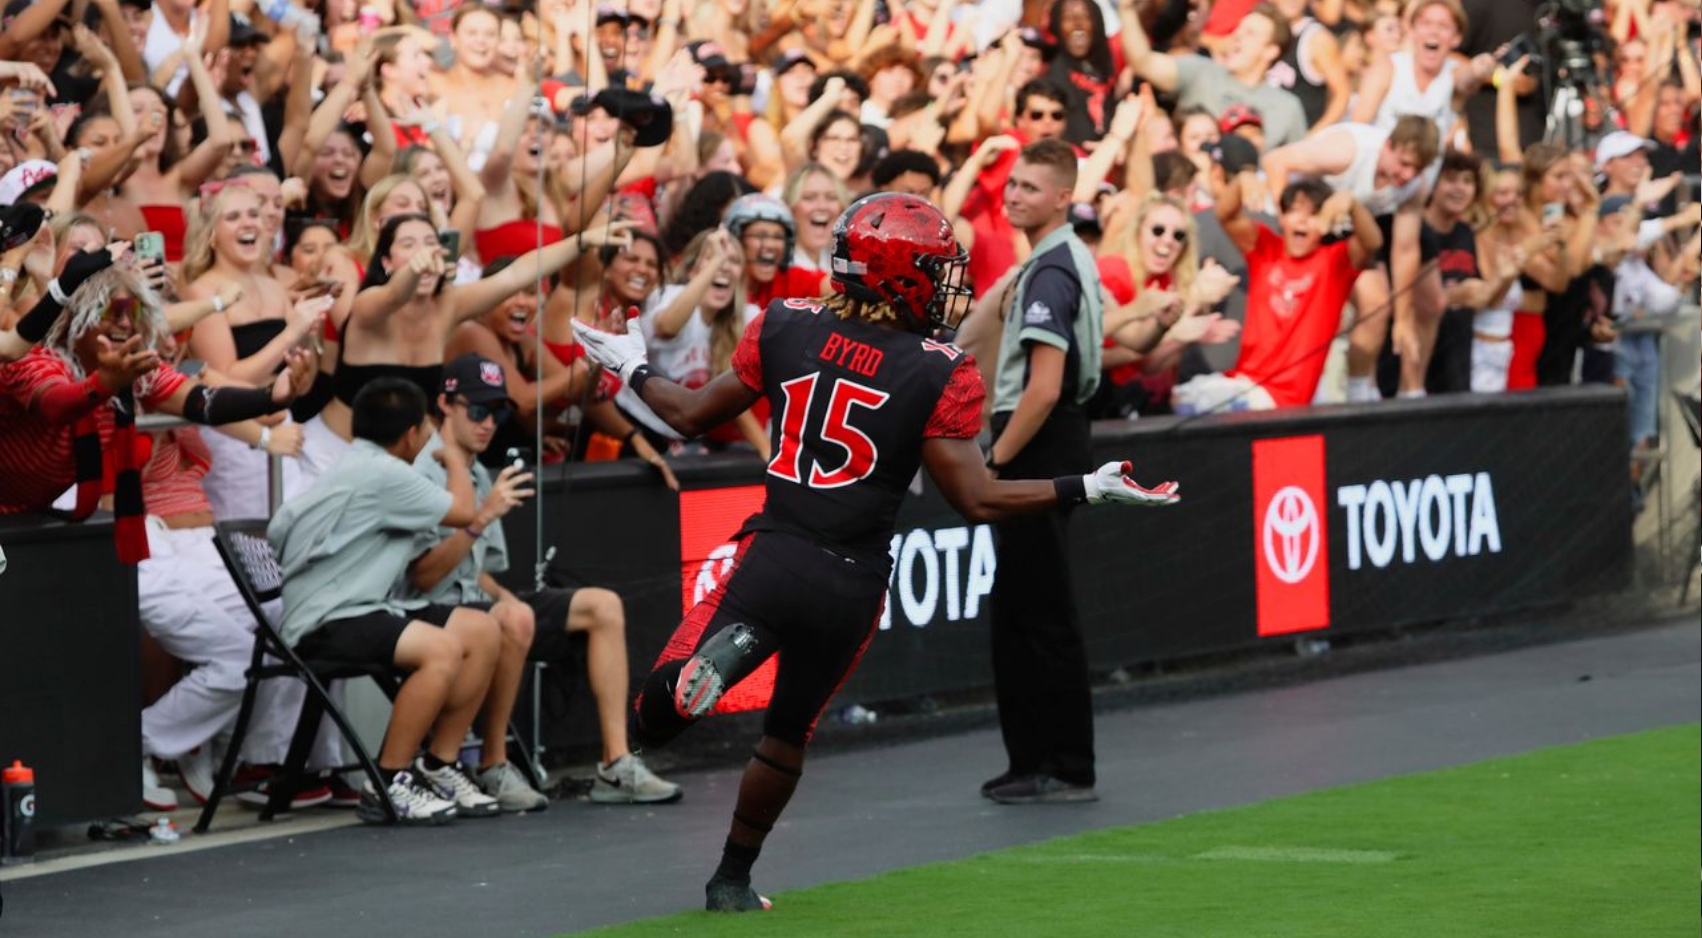 SDSU running back Jordan Byrd (15) celebrates a touchdown run near the student section during the Aztecs game against Idaho State at Snapdragon Stadium, September 10, 2022. (SDSU)